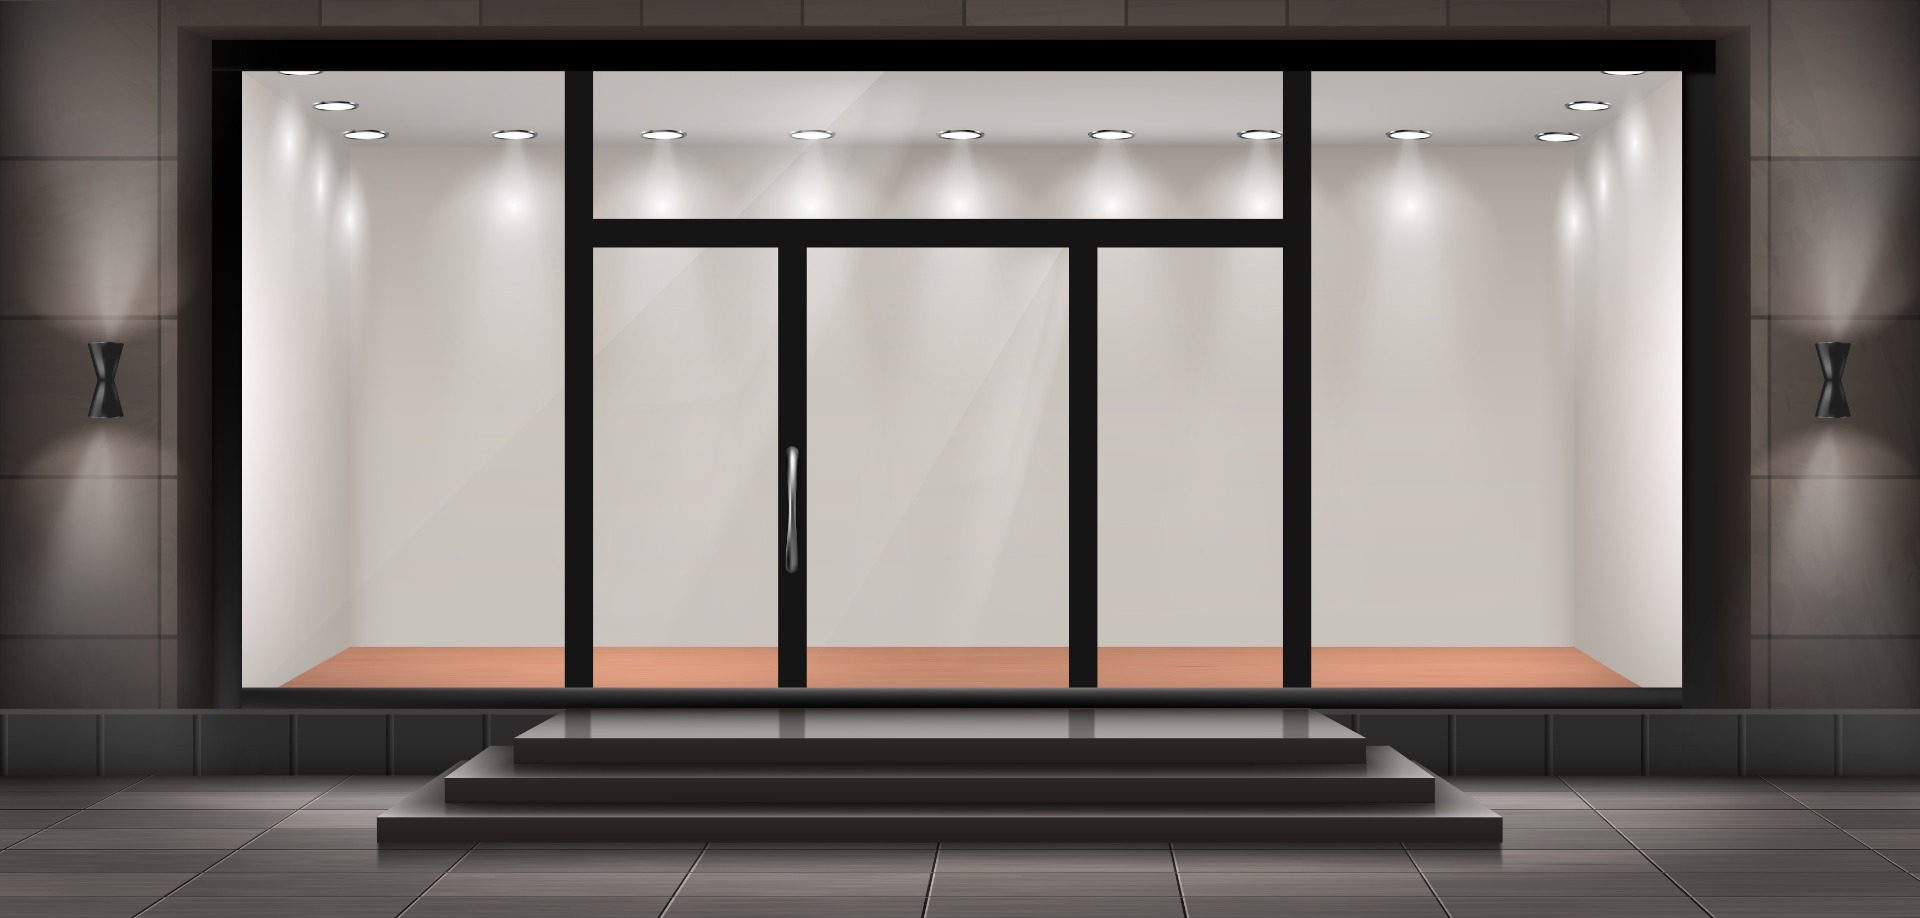 Doors And Windows Solution For Storefronts And Commercial Glasses Everything Glass Friendly